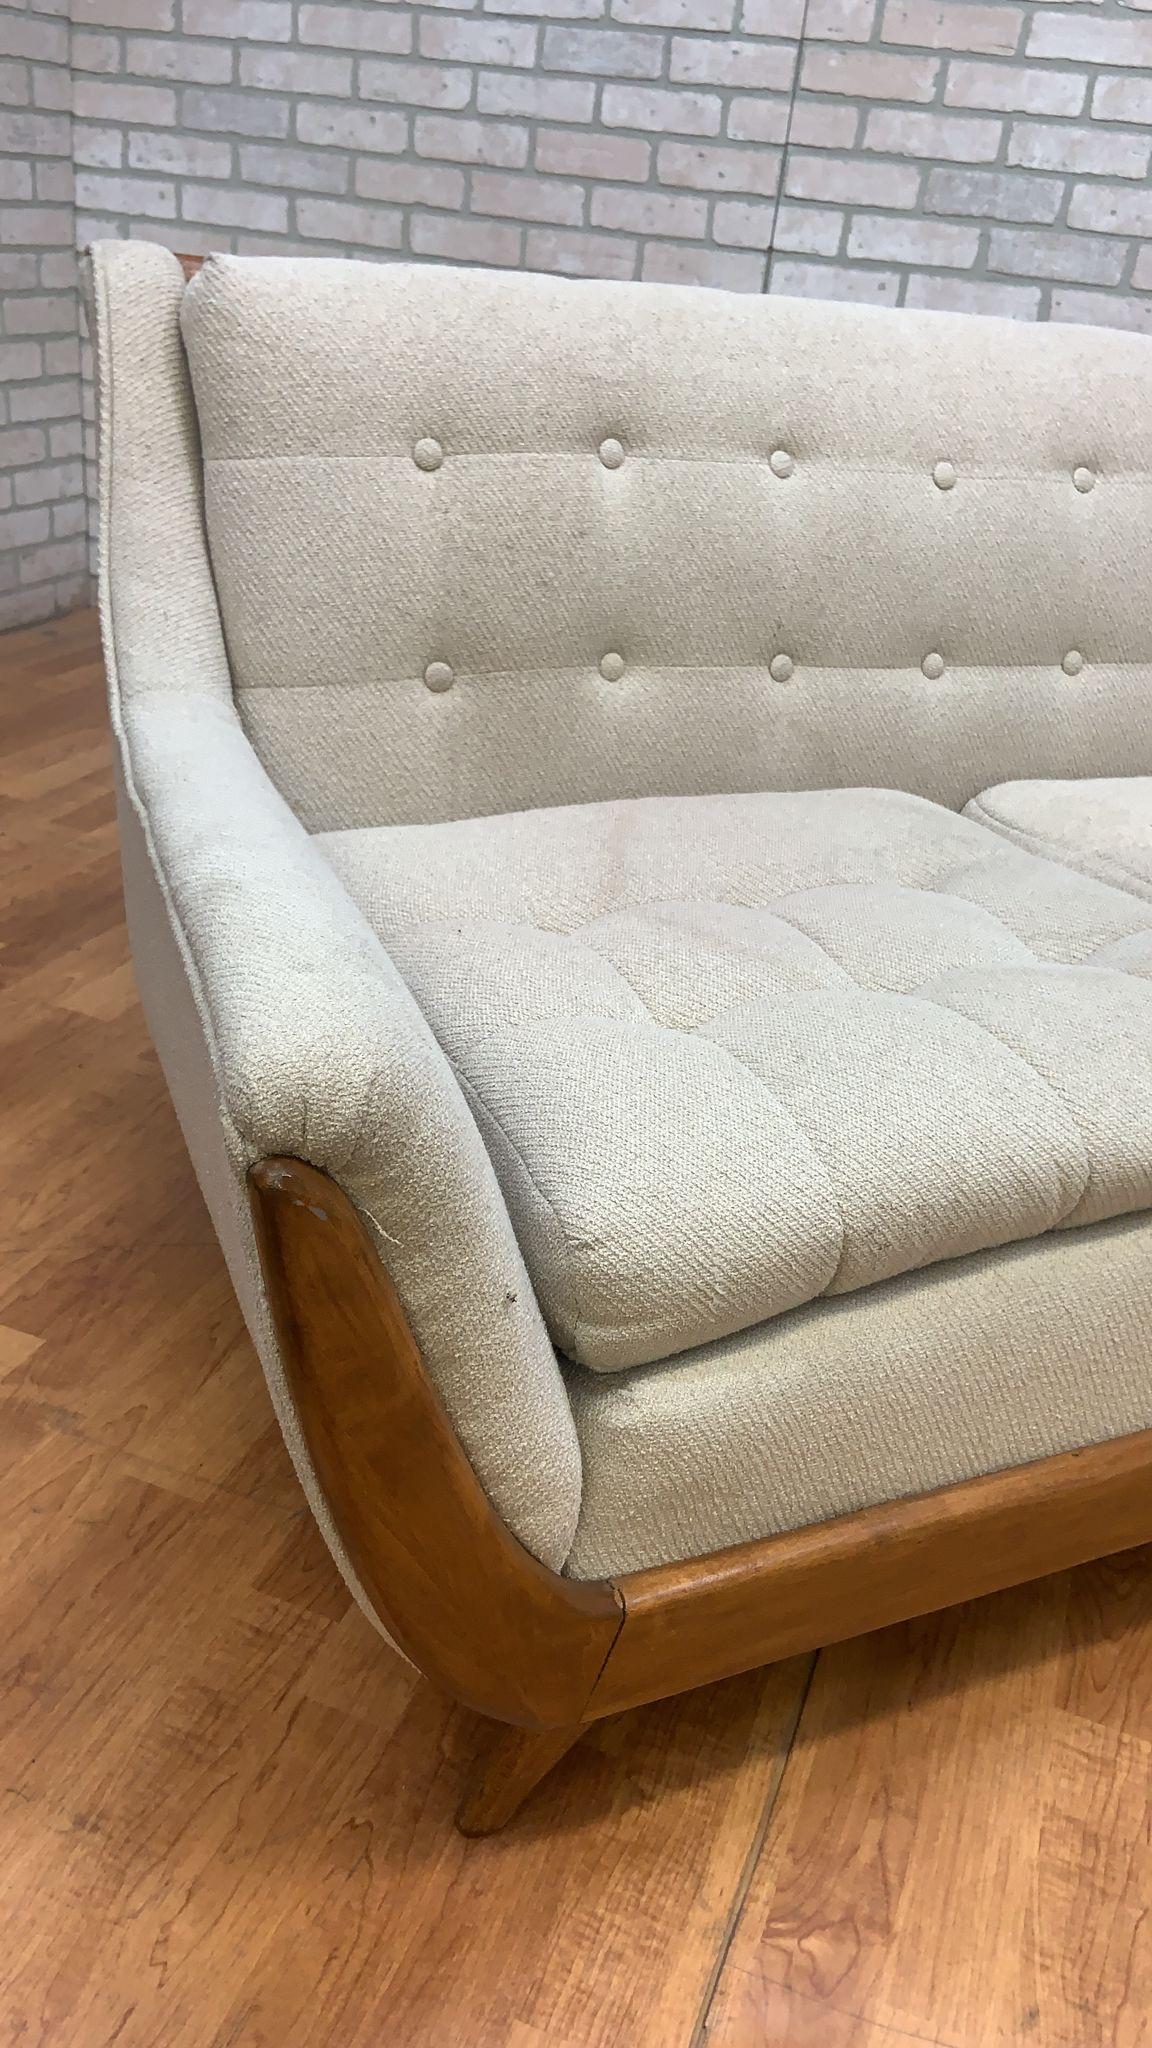 Mid Century Modern Adrian Pearsall Style Walnut Gondola Sofa and Club Chair - Set of 2

This amazing and study Adrian Pearsall Style gondola sofa and club chair set is on a walnut base. This sofa and chair set is being sold in its original condition